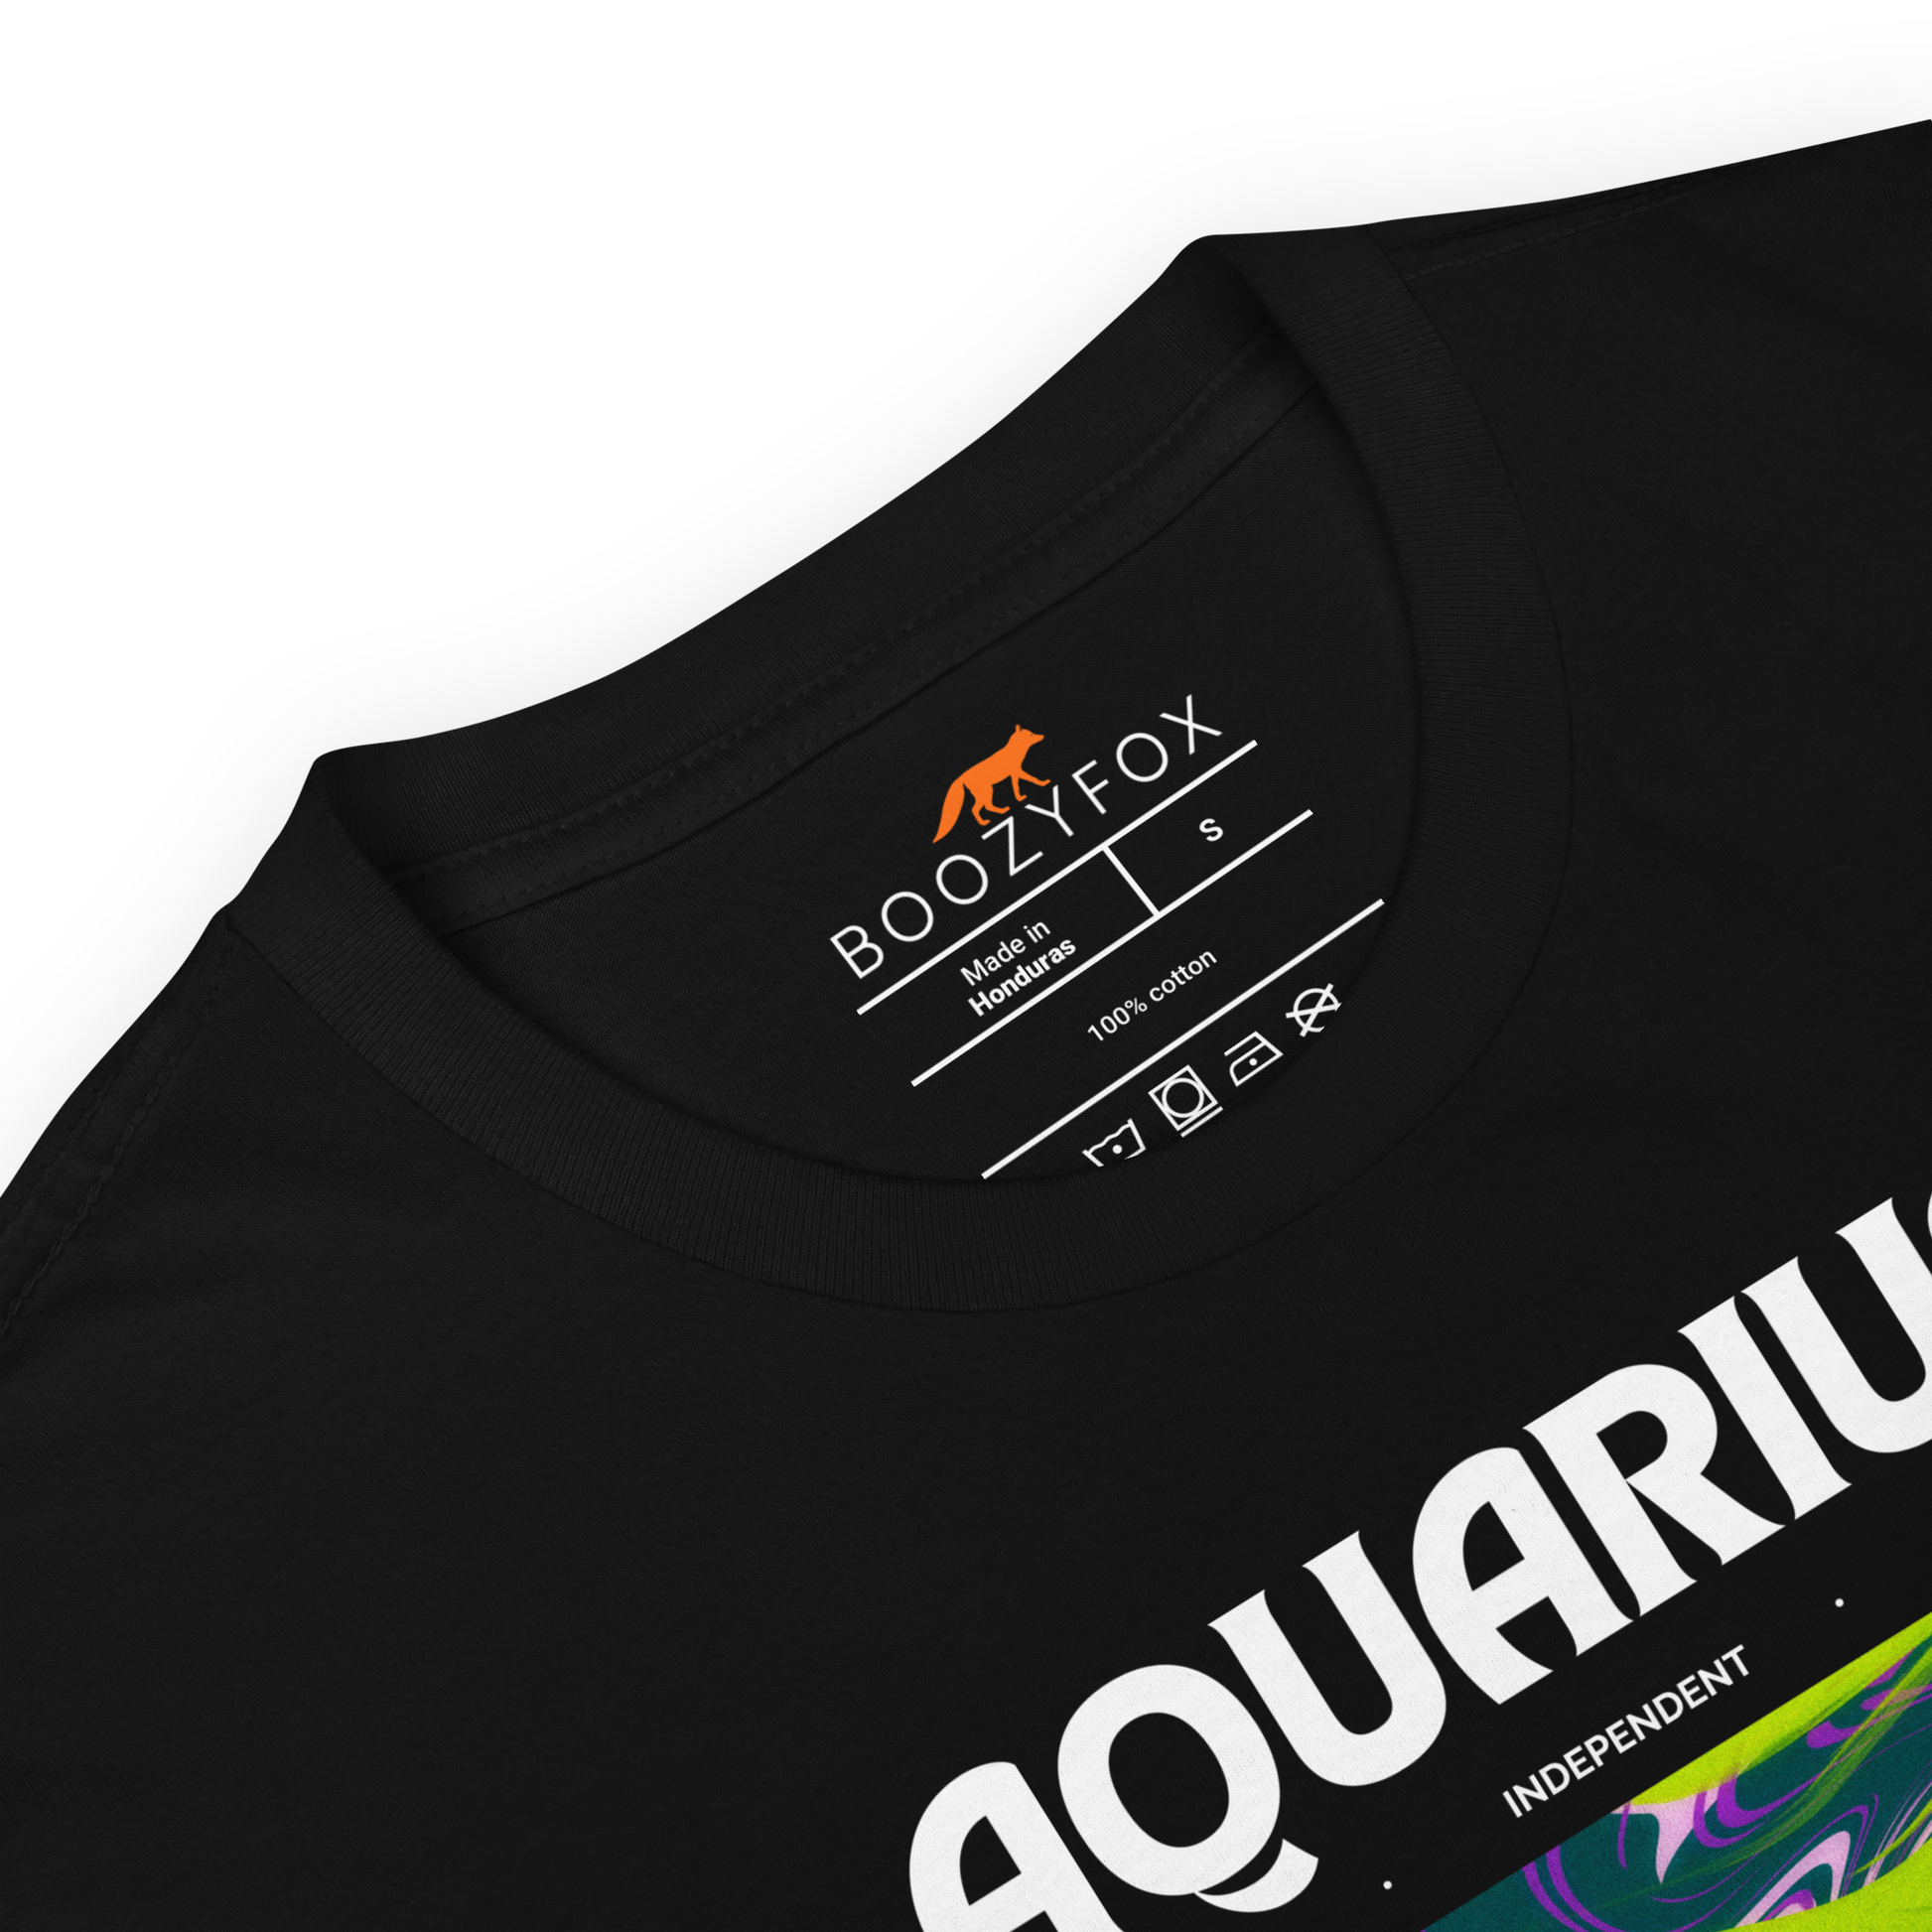 Product details of a Black Aquarius T-Shirt featuring an Abstract Aquarius Star Sign graphic on the chest - Cool Graphic Zodiac T-Shirts - Boozy Fox